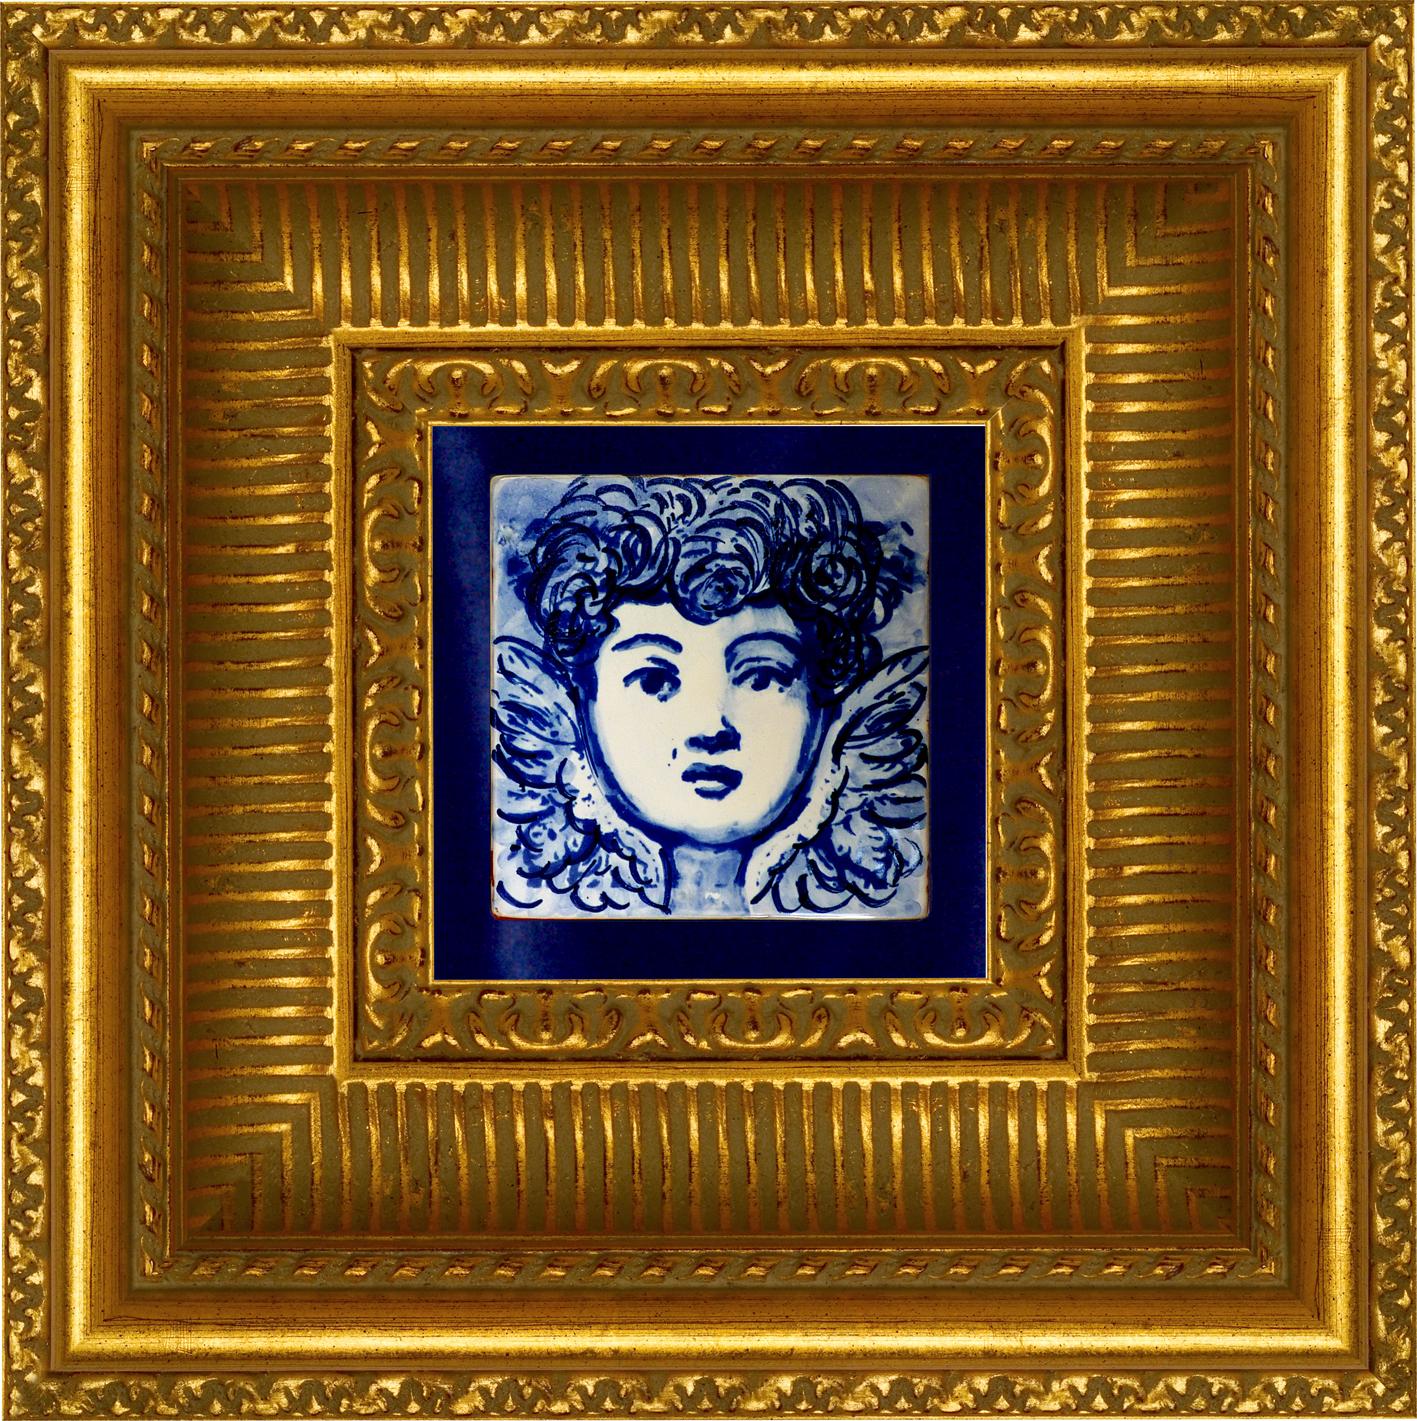 Gorgeous blue hand-painted baroque cherub or angel 18th century style Portuguese ceramic tile/Azulejo
The tile painted in cobalt blue over white in typical 18th century Portugal set the taste for monumental ceramic tile applications in churches and